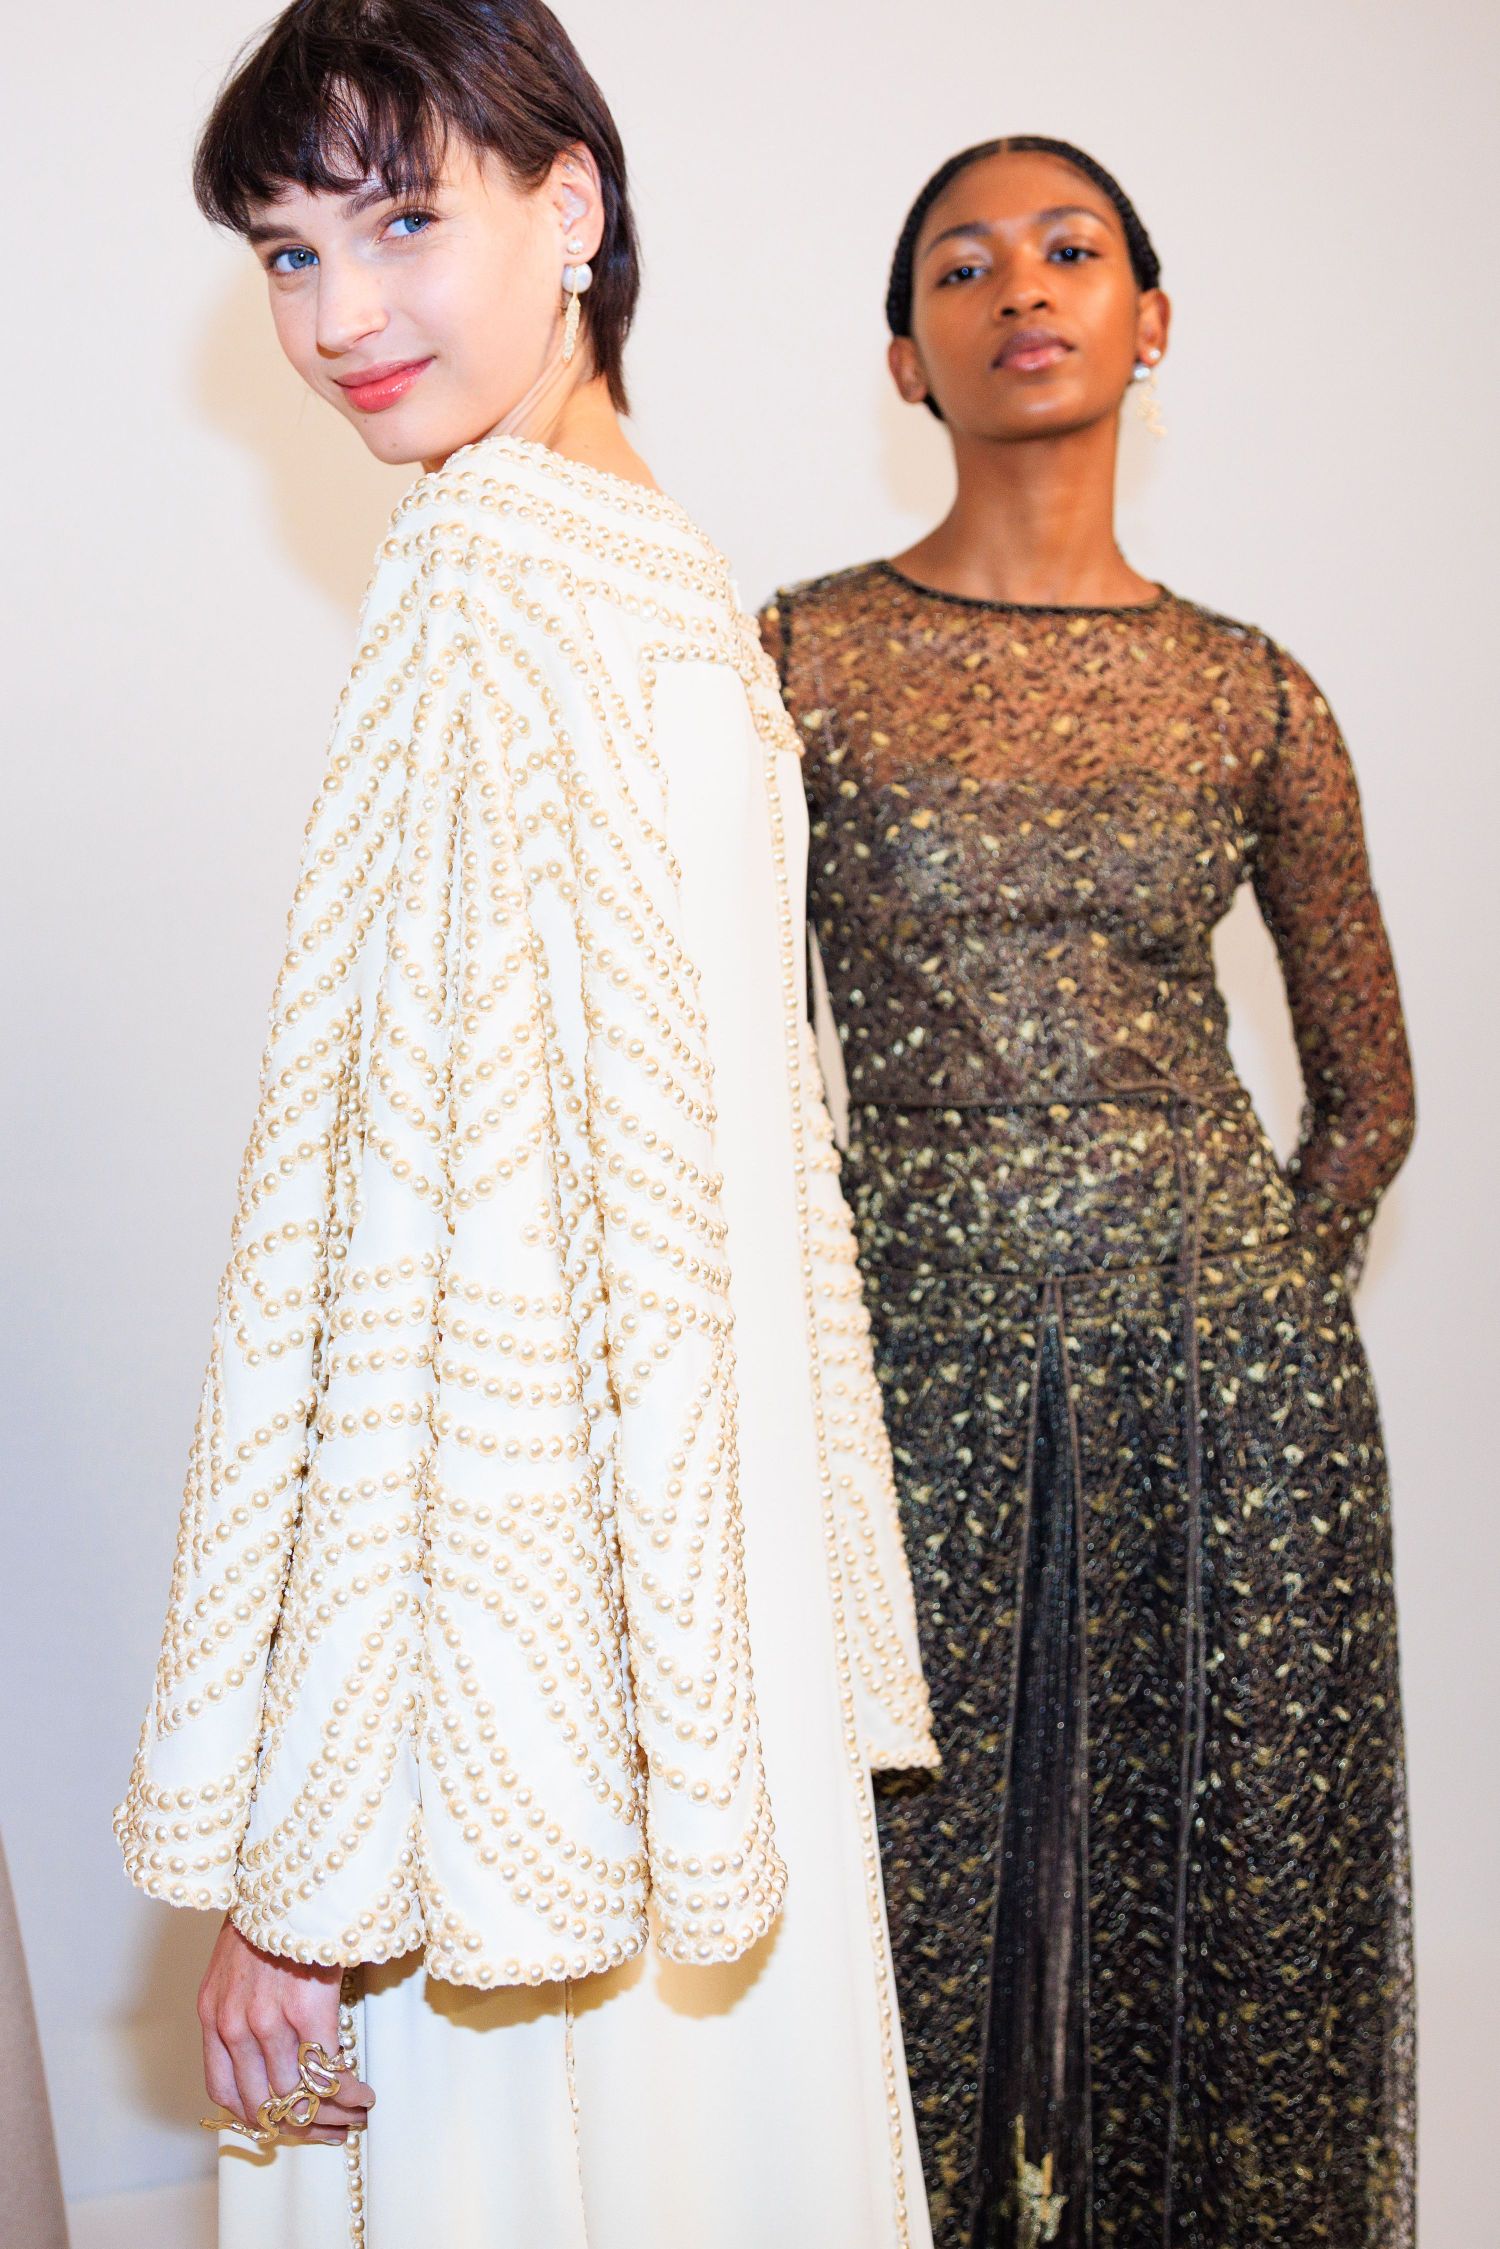 Step backstage at the Haute Couture shows for the must-see moments you ...